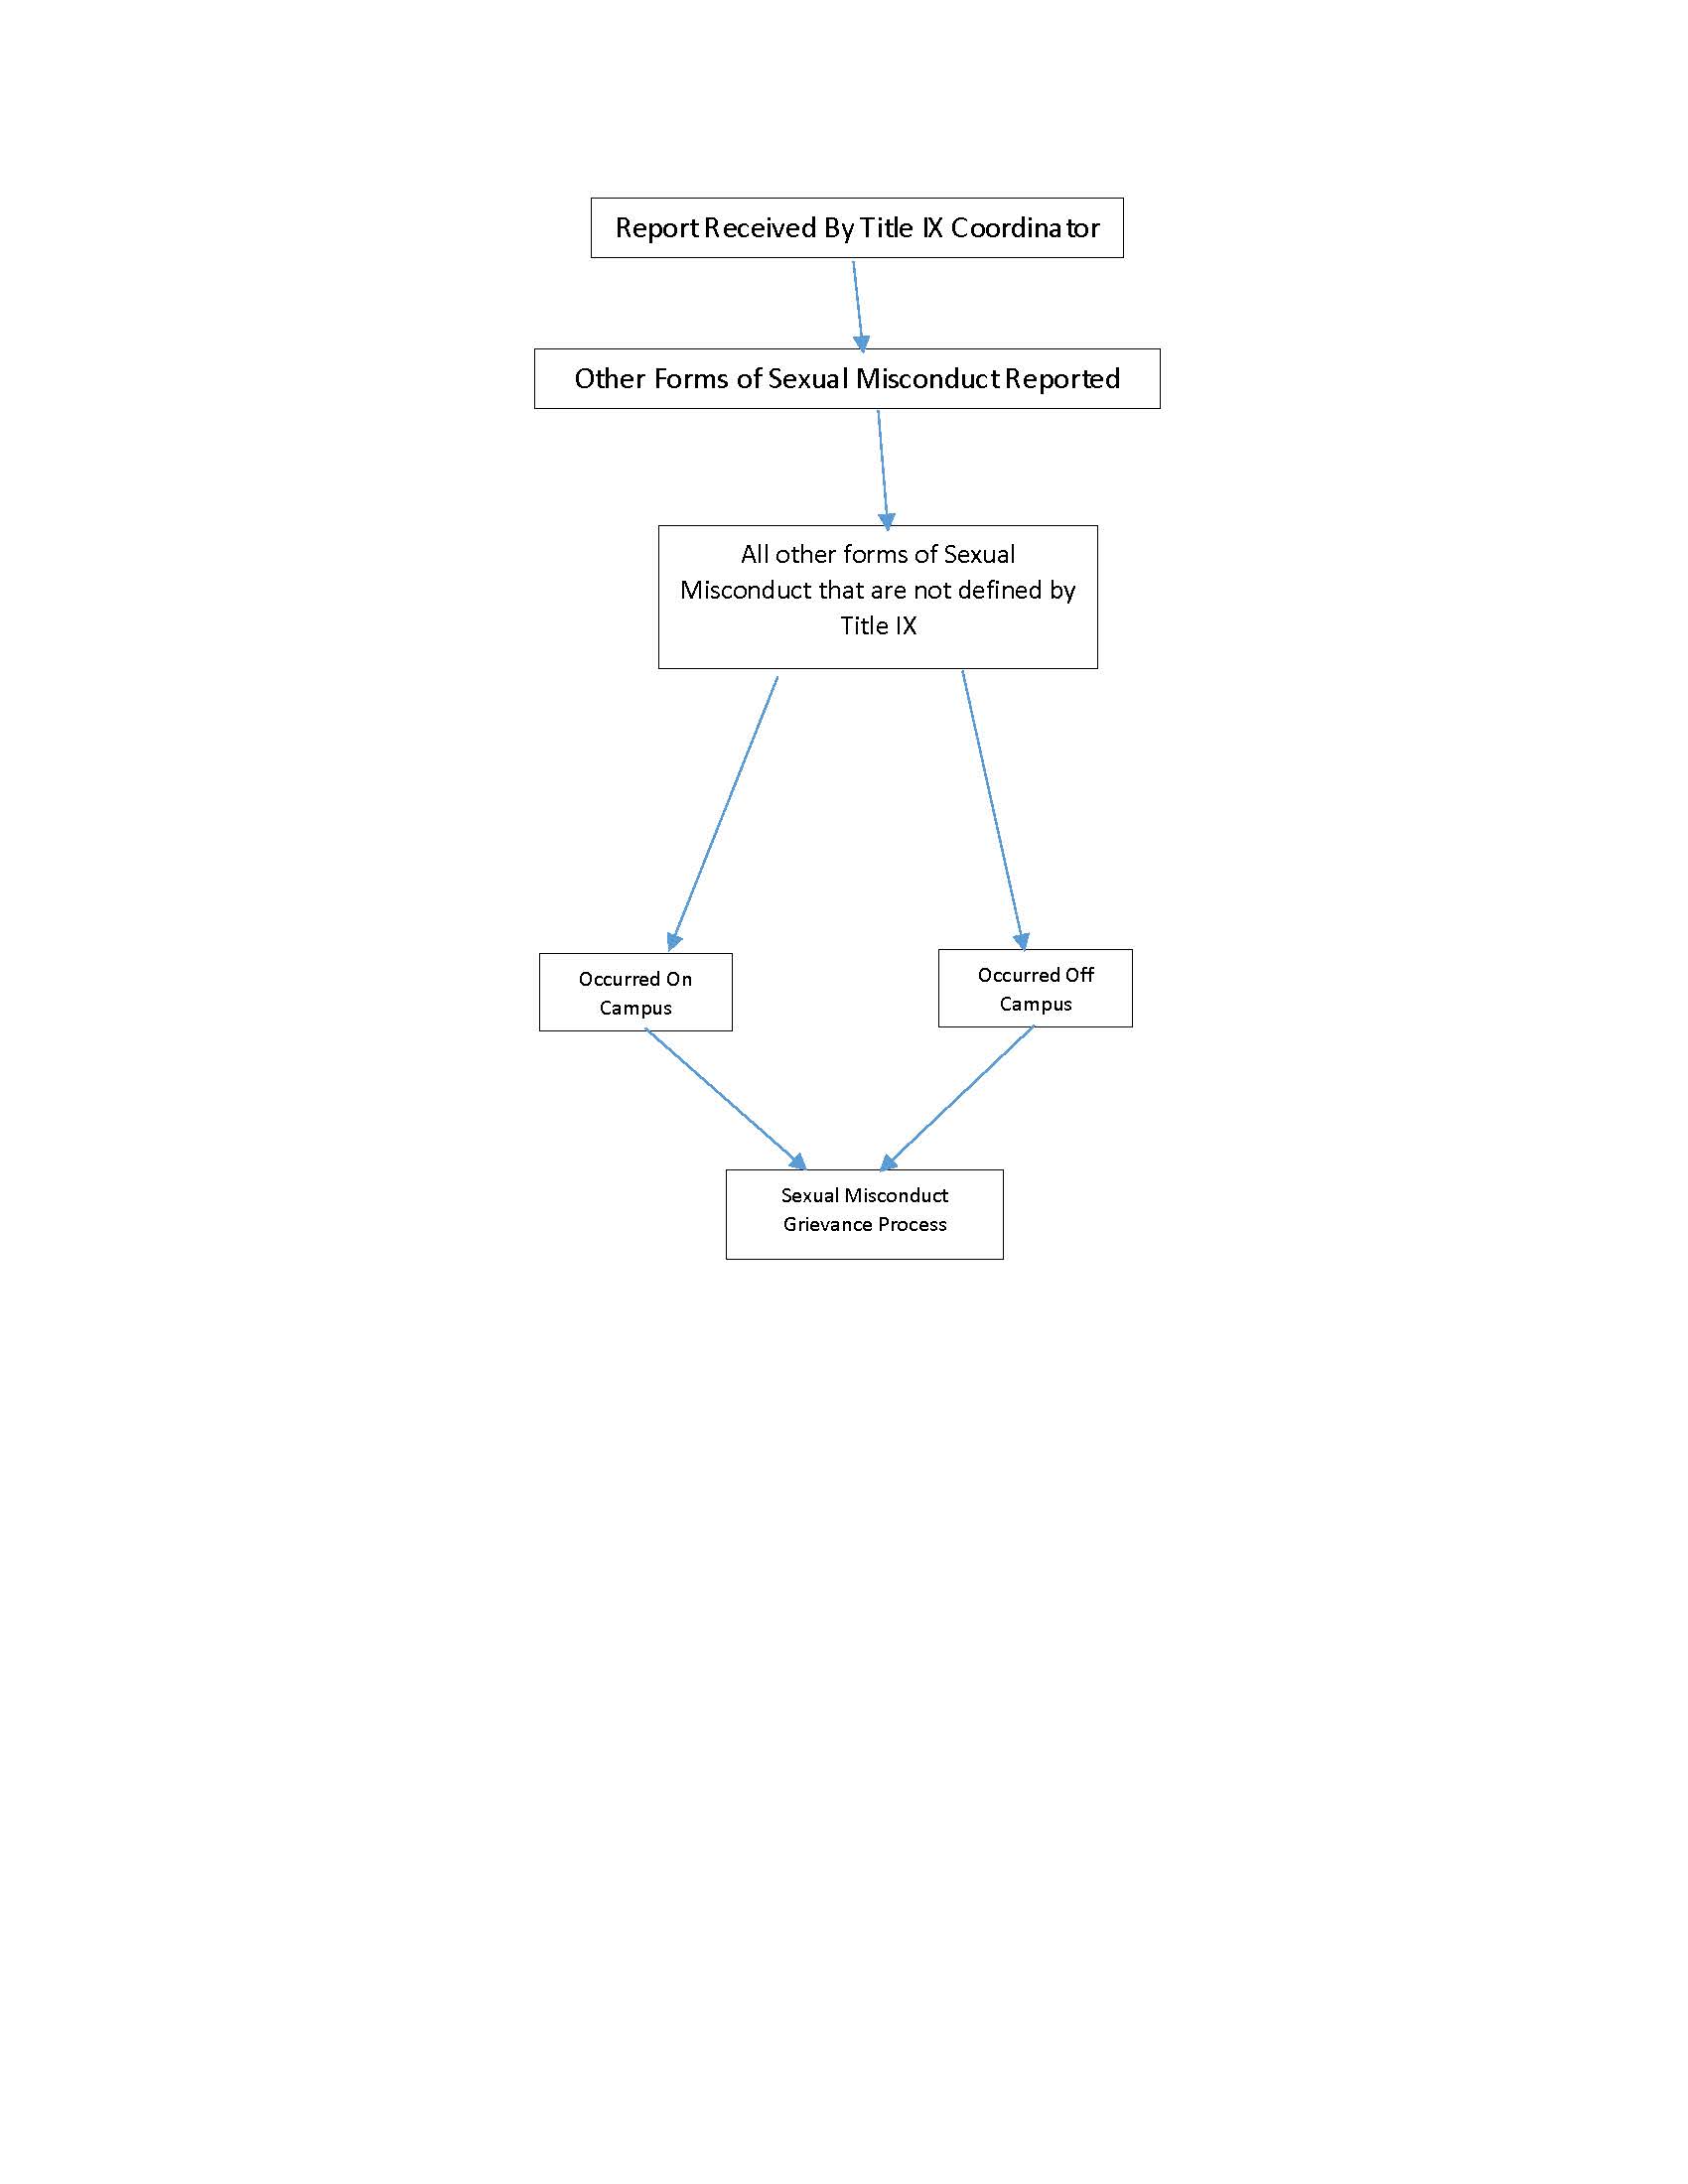 Assessment Flow Chart when other forms of sexual misconduct is reported - see text below for details